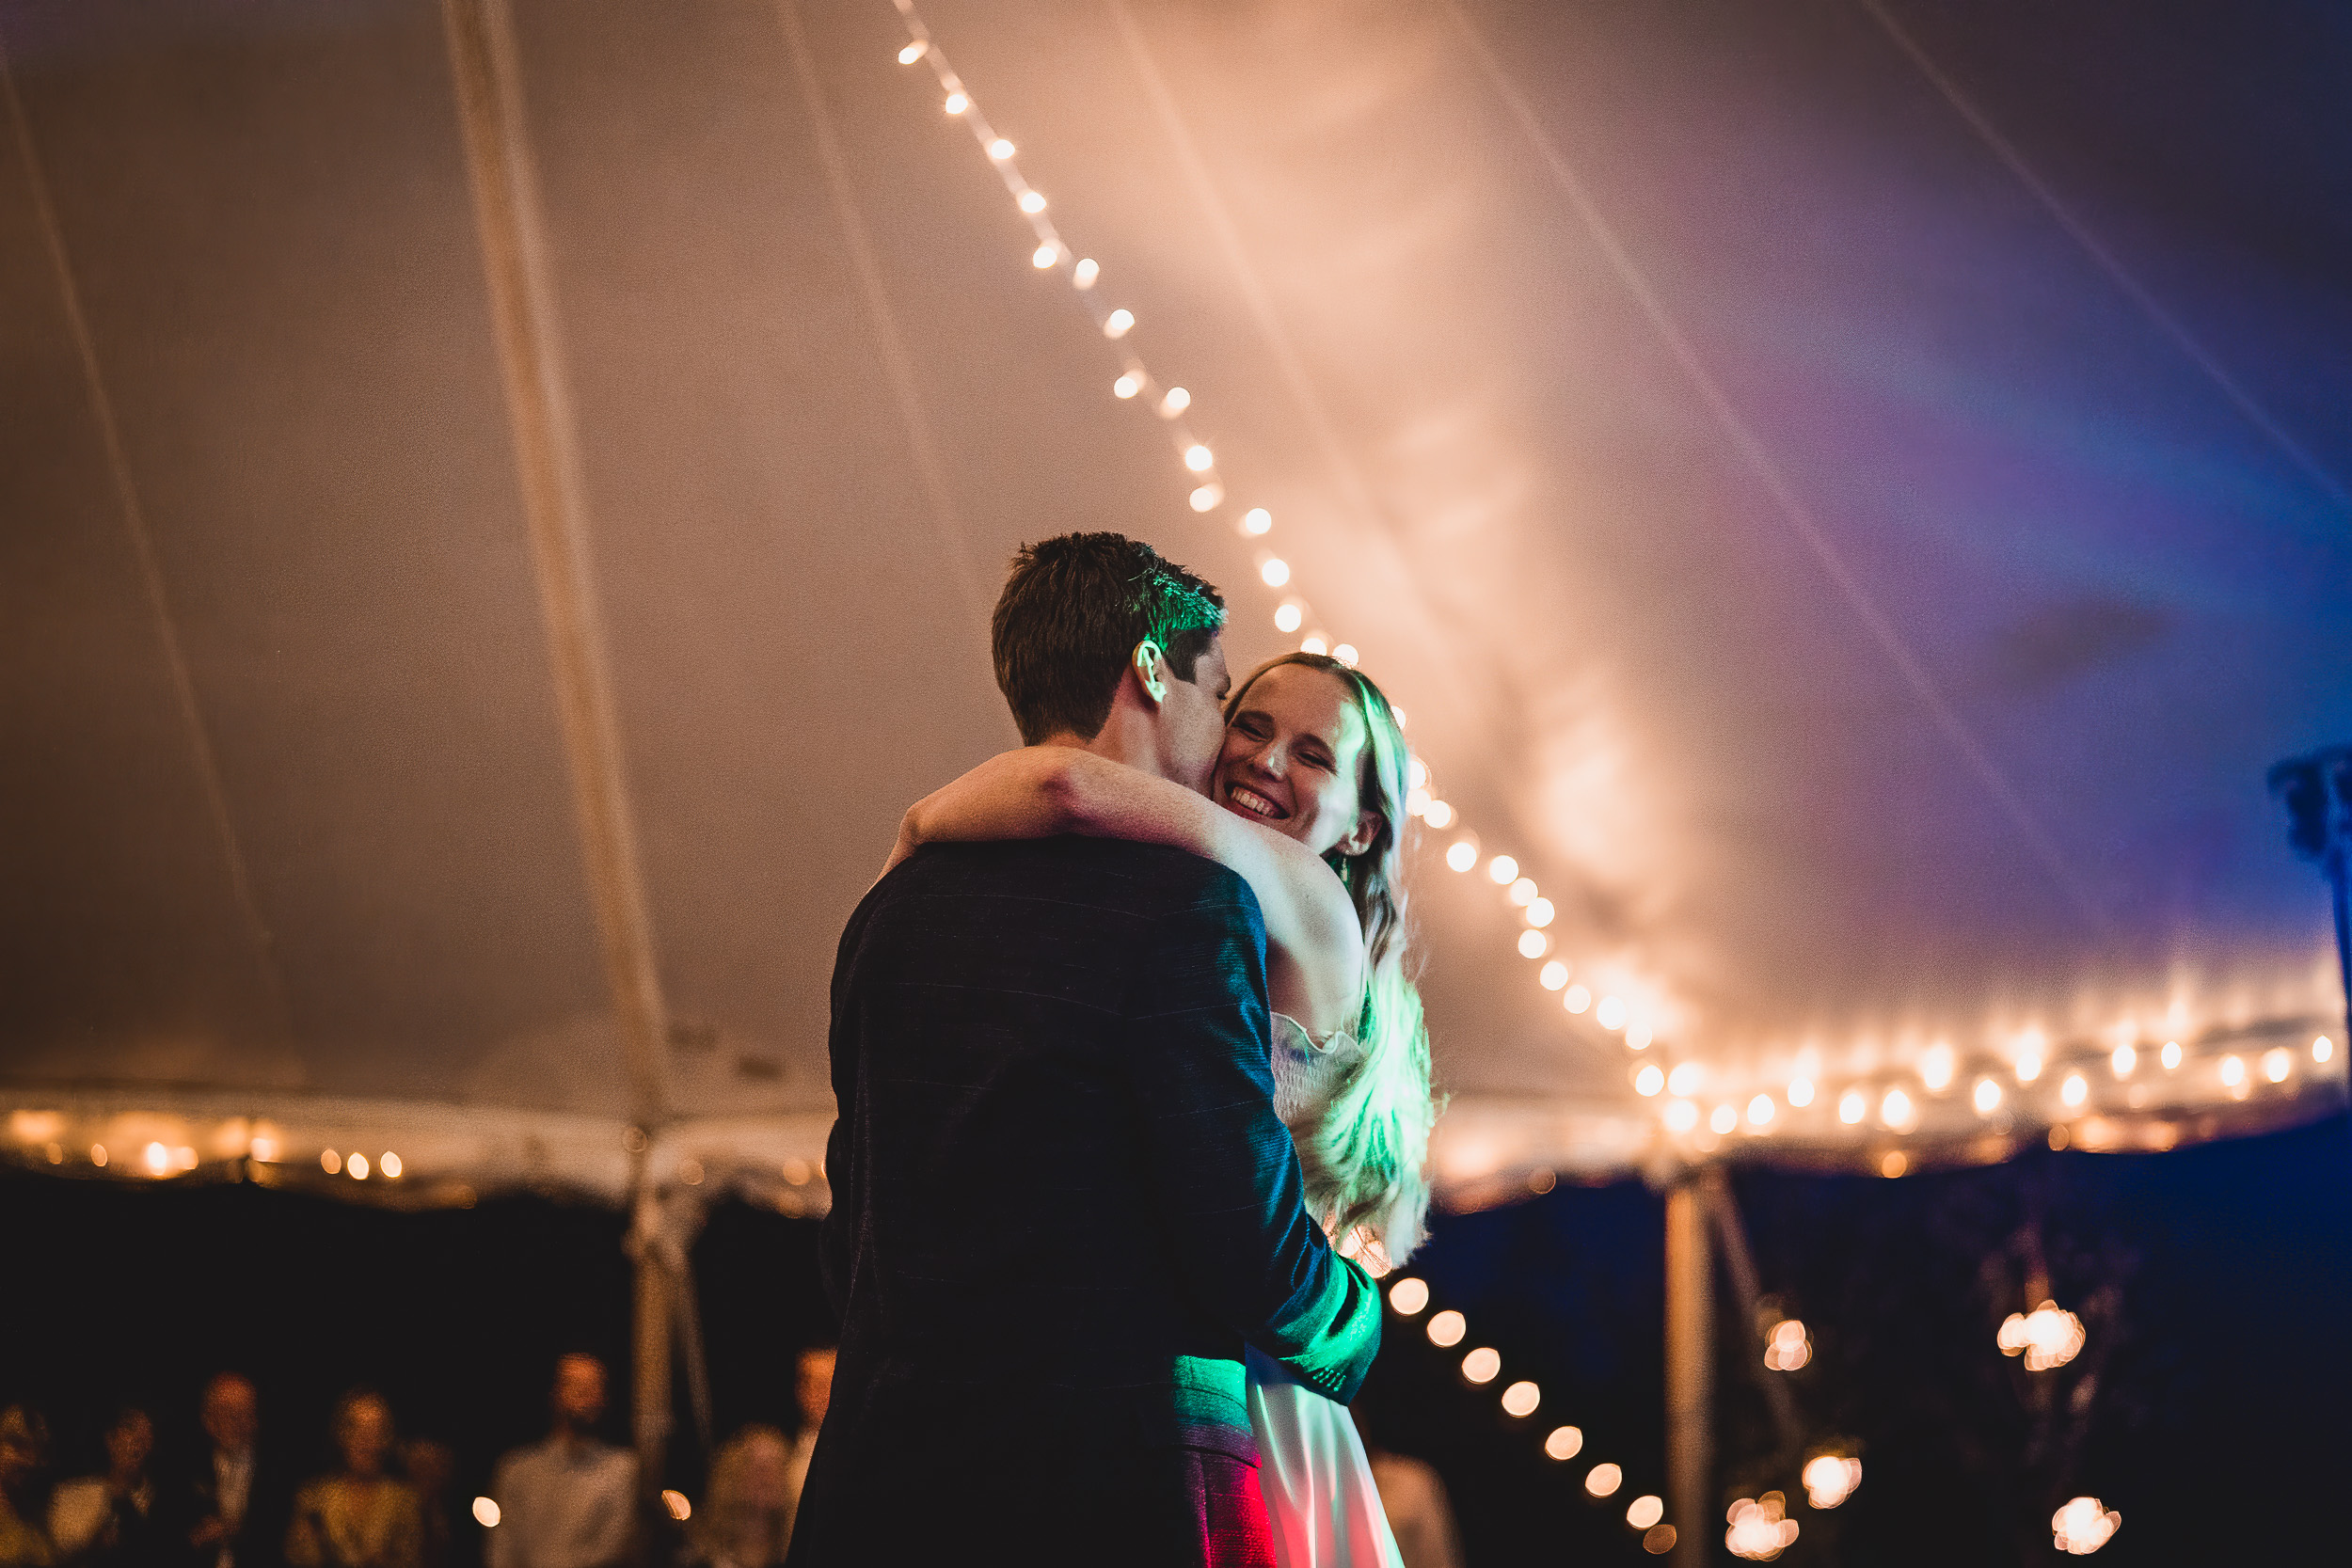 A bride and groom sharing their first dance in a wedding photo.